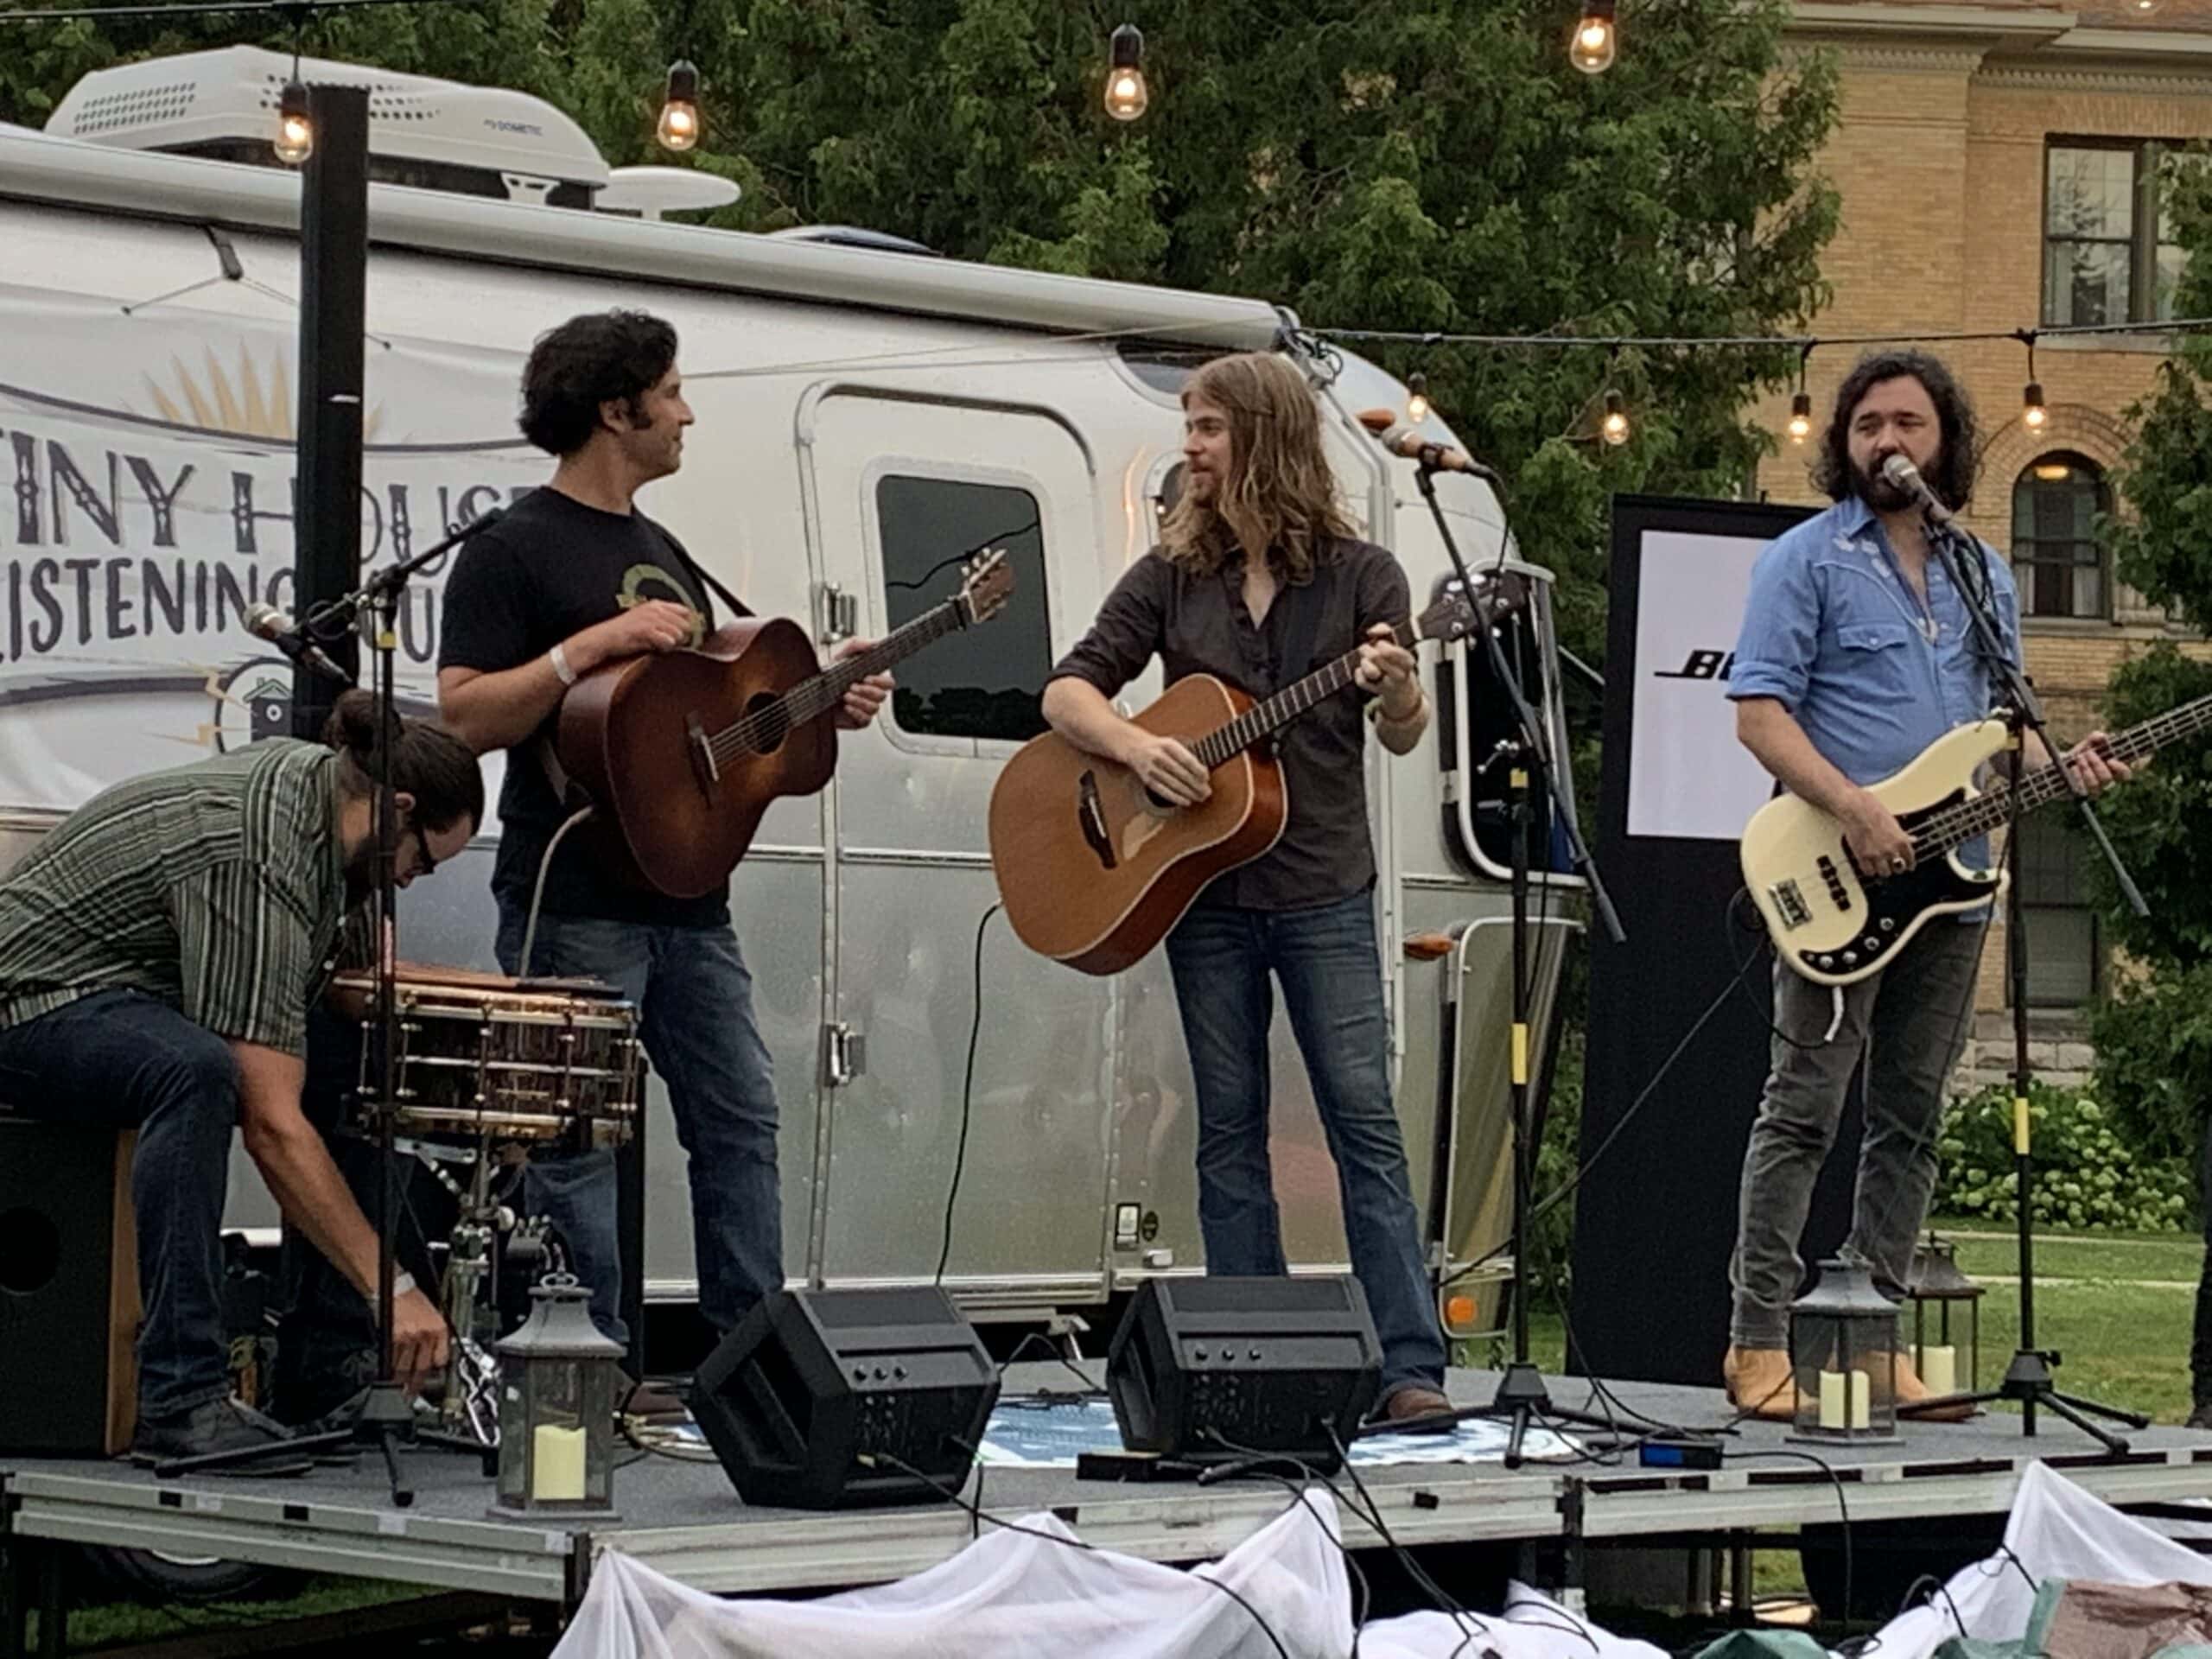 A three piece guitar band playing on an outdoor stage